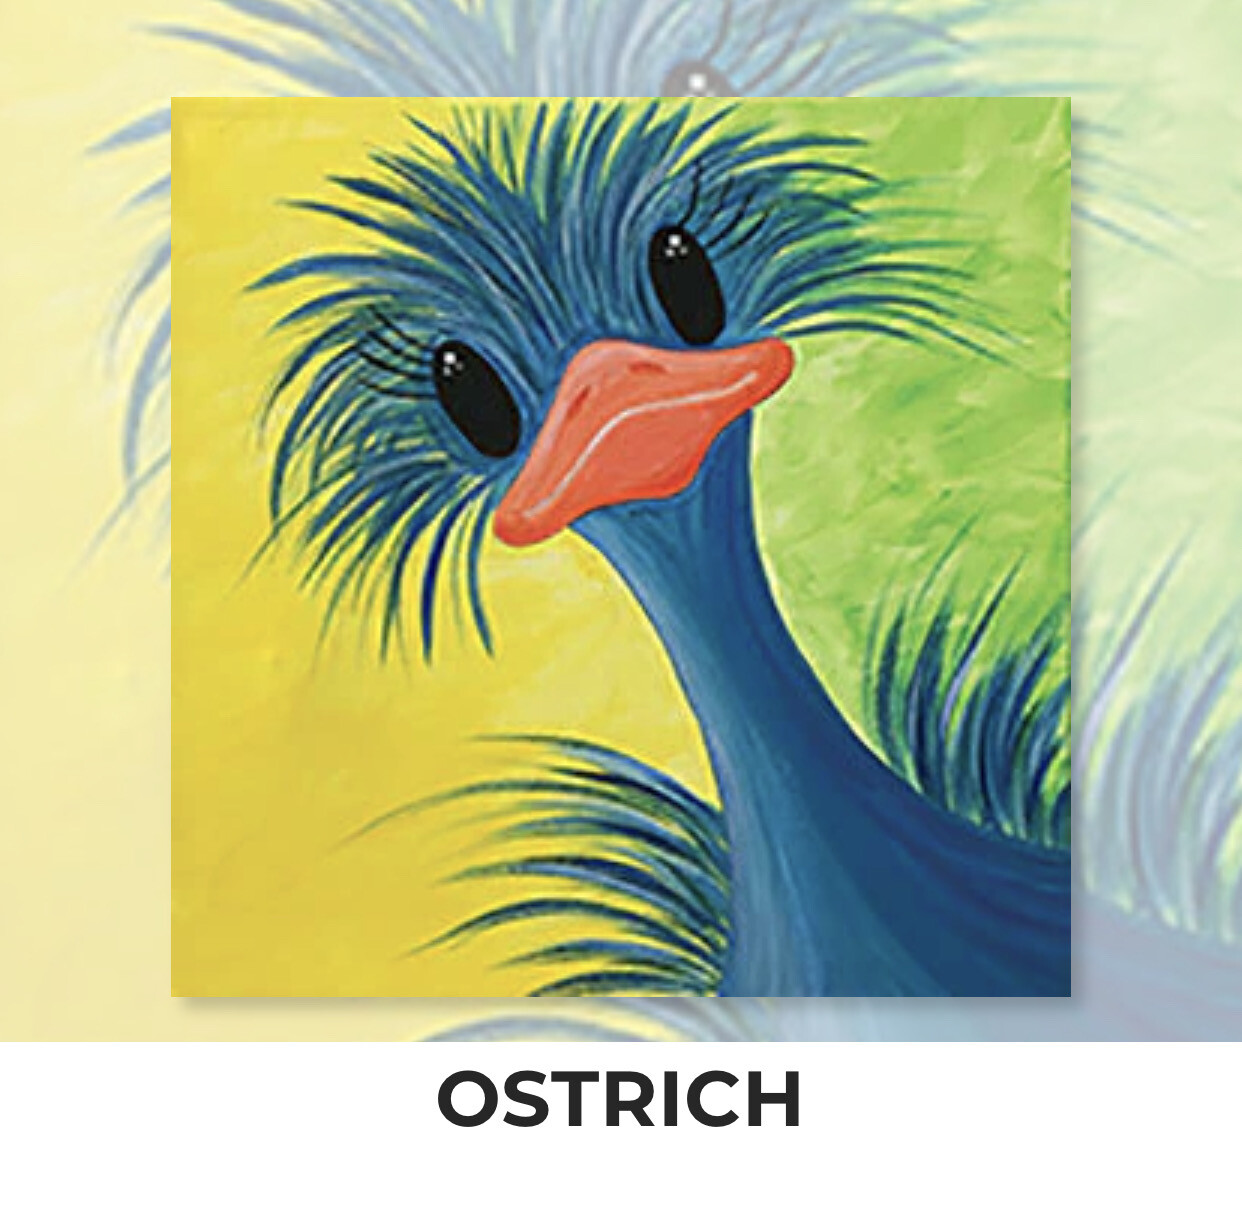 Ostrich ADULT OR TWEEN Acrylic Paint On Canvas DIY Art Kit - 3 Week Special Order